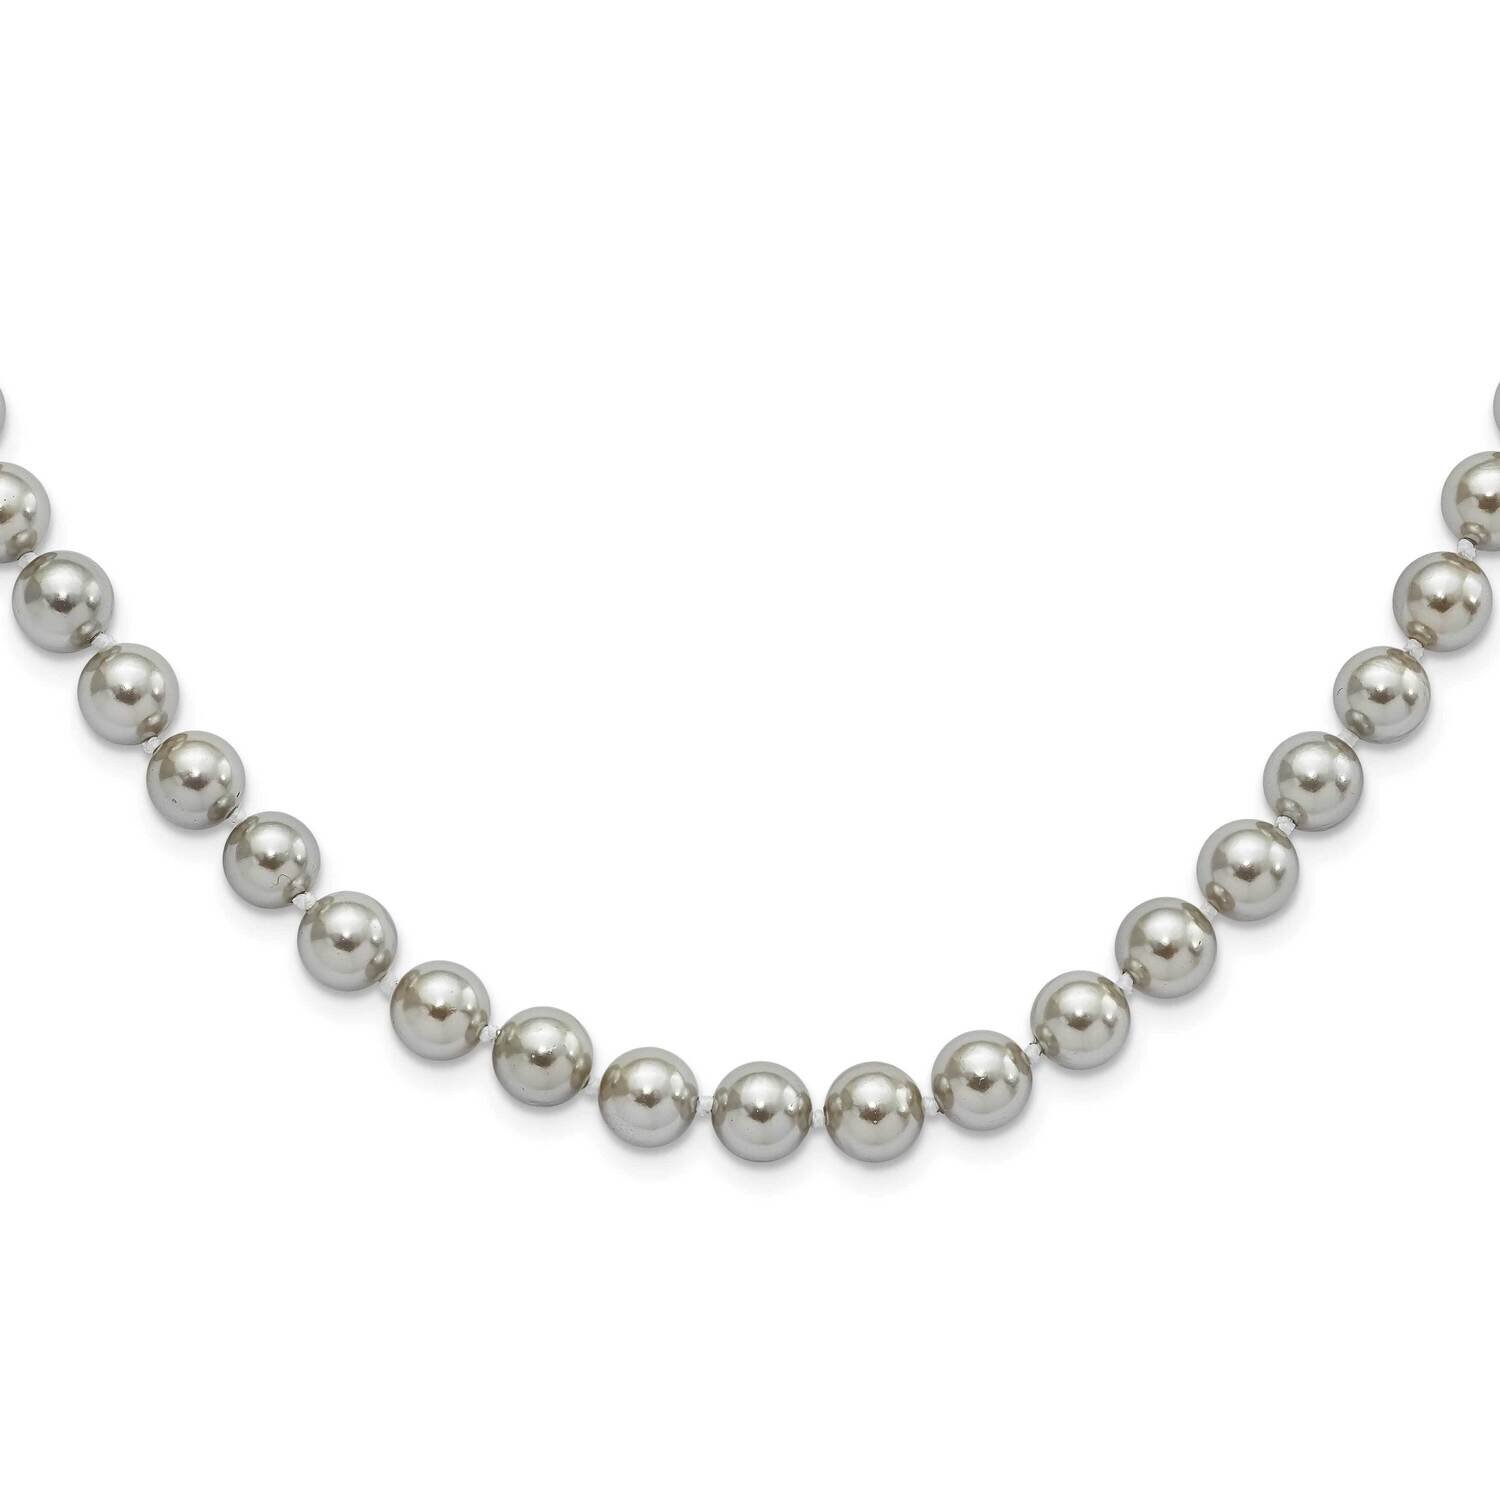 Majestik 8-9mm Grey Imitation Shell Pearl Necklace Sterling Silver Rhodium-plated QMJNM8G-18